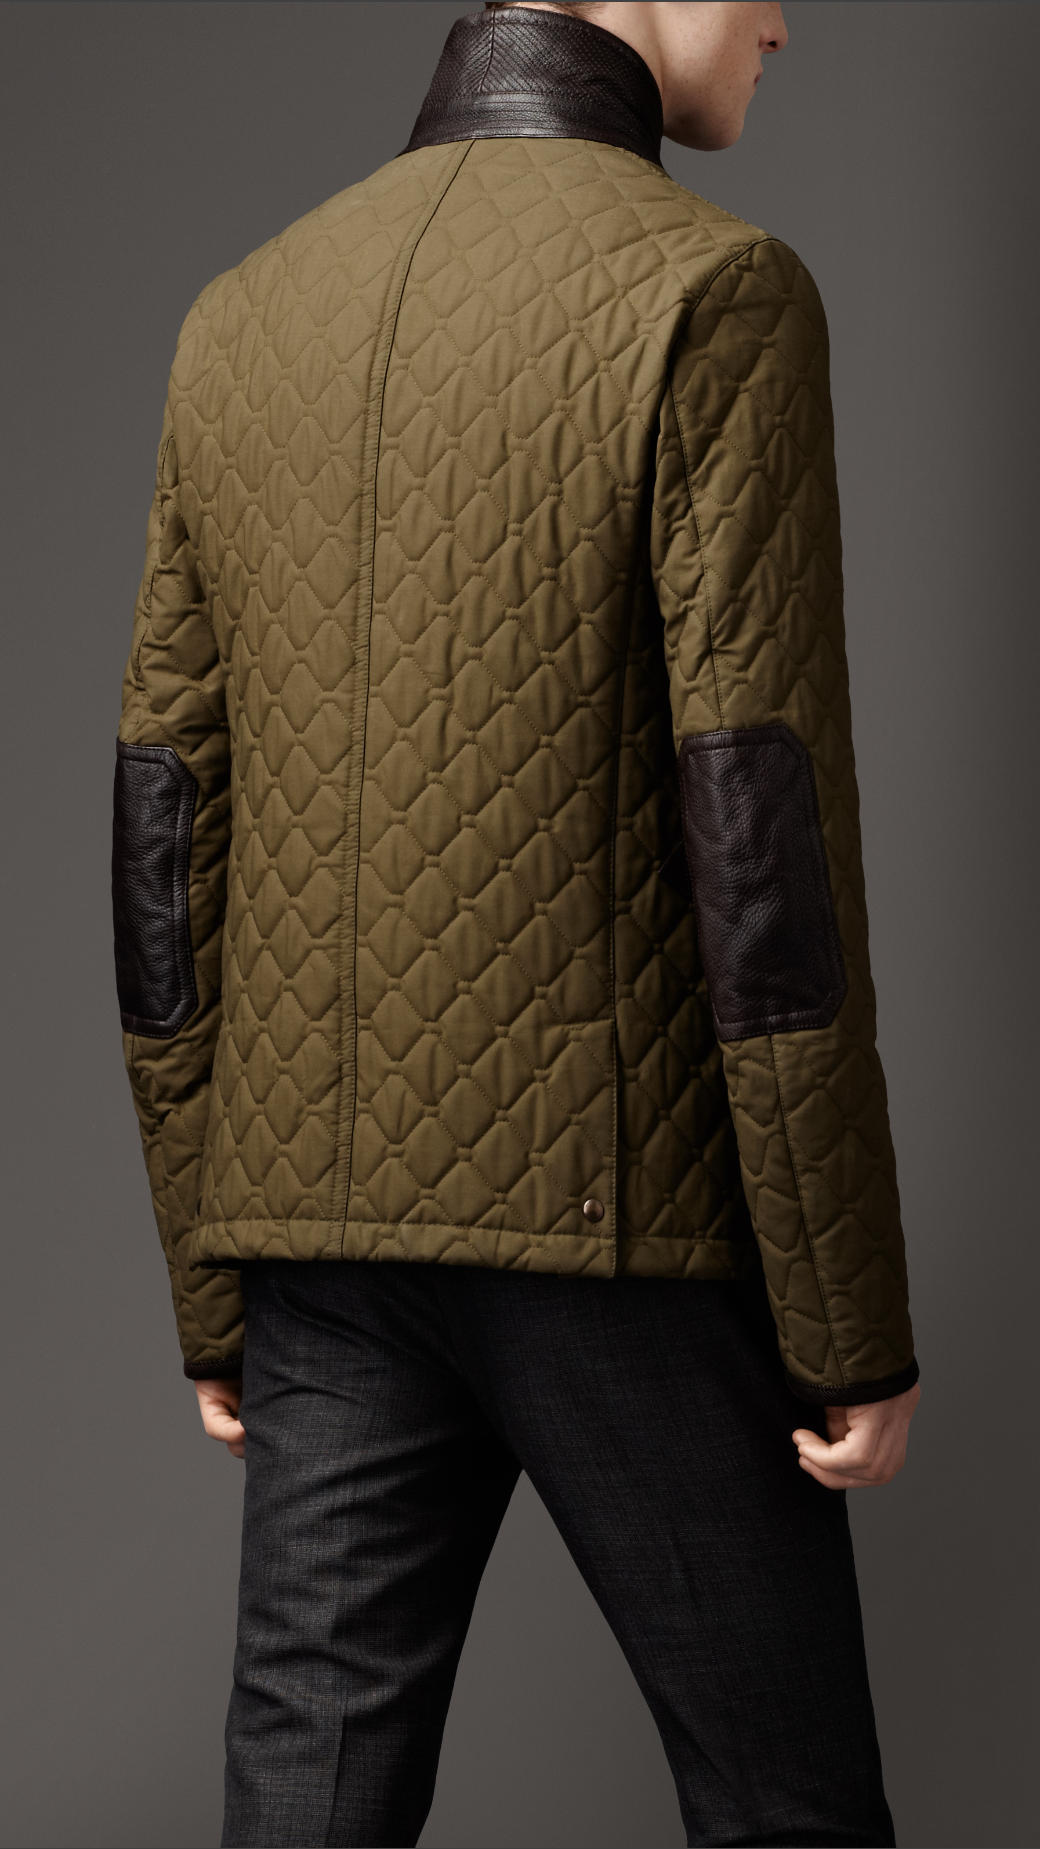 Lyst - Burberry Waxed Cotton Quilted Jacket in Green for Men